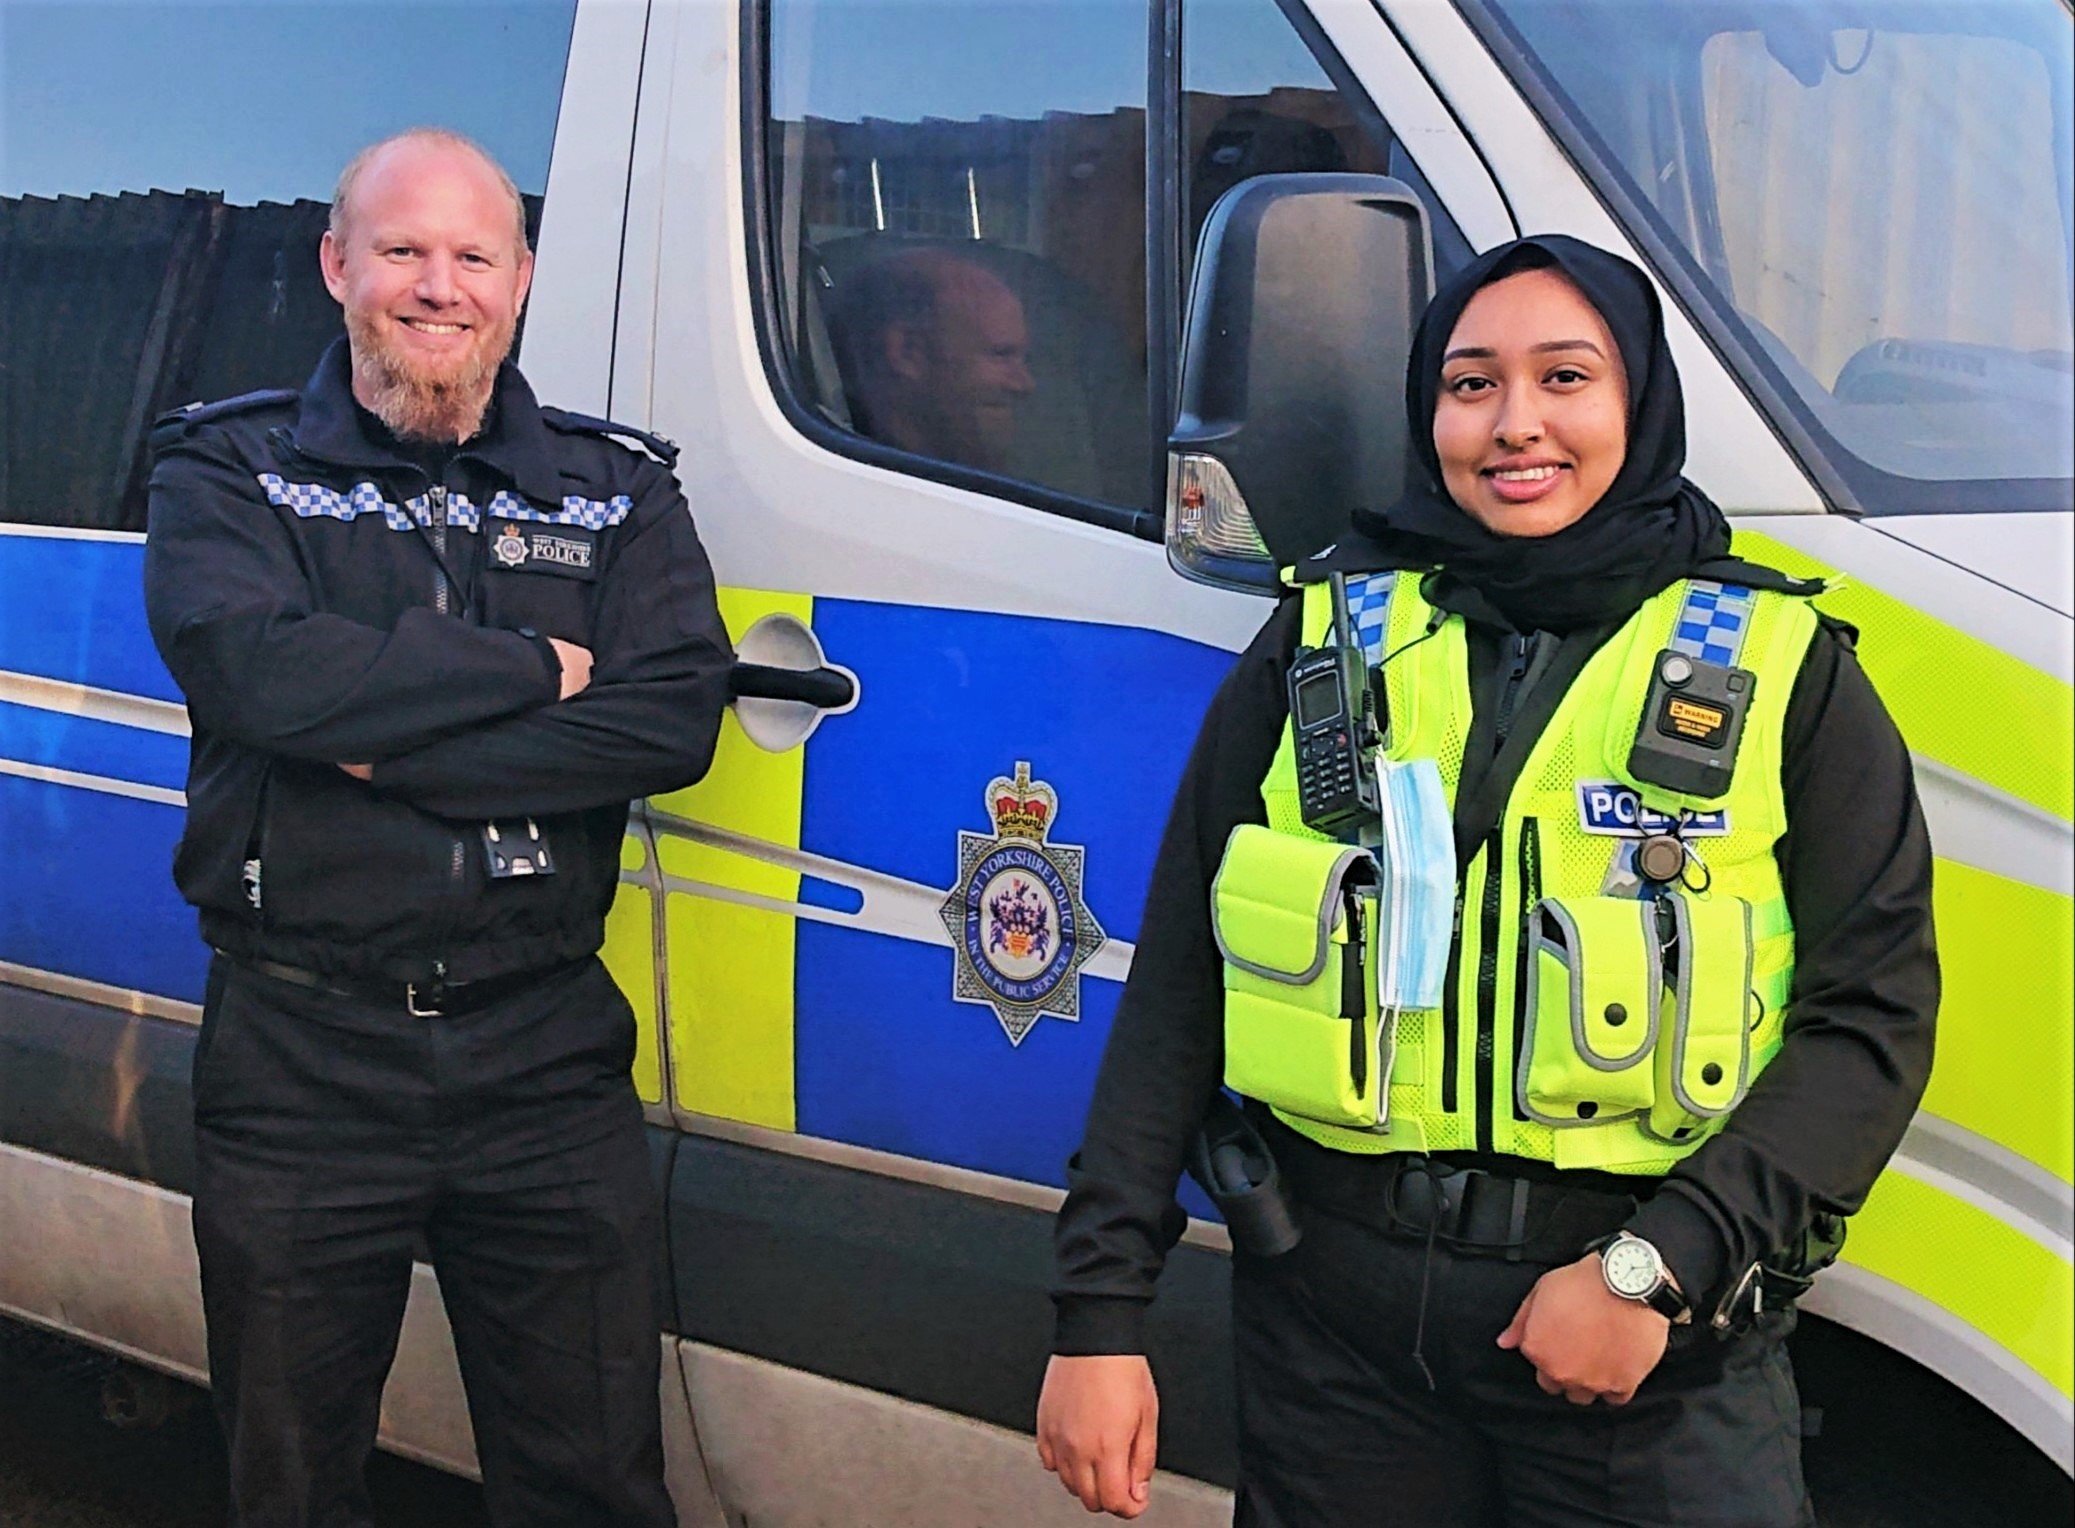 Male and female Muslim officers standing next to a police van and smiling to camera.